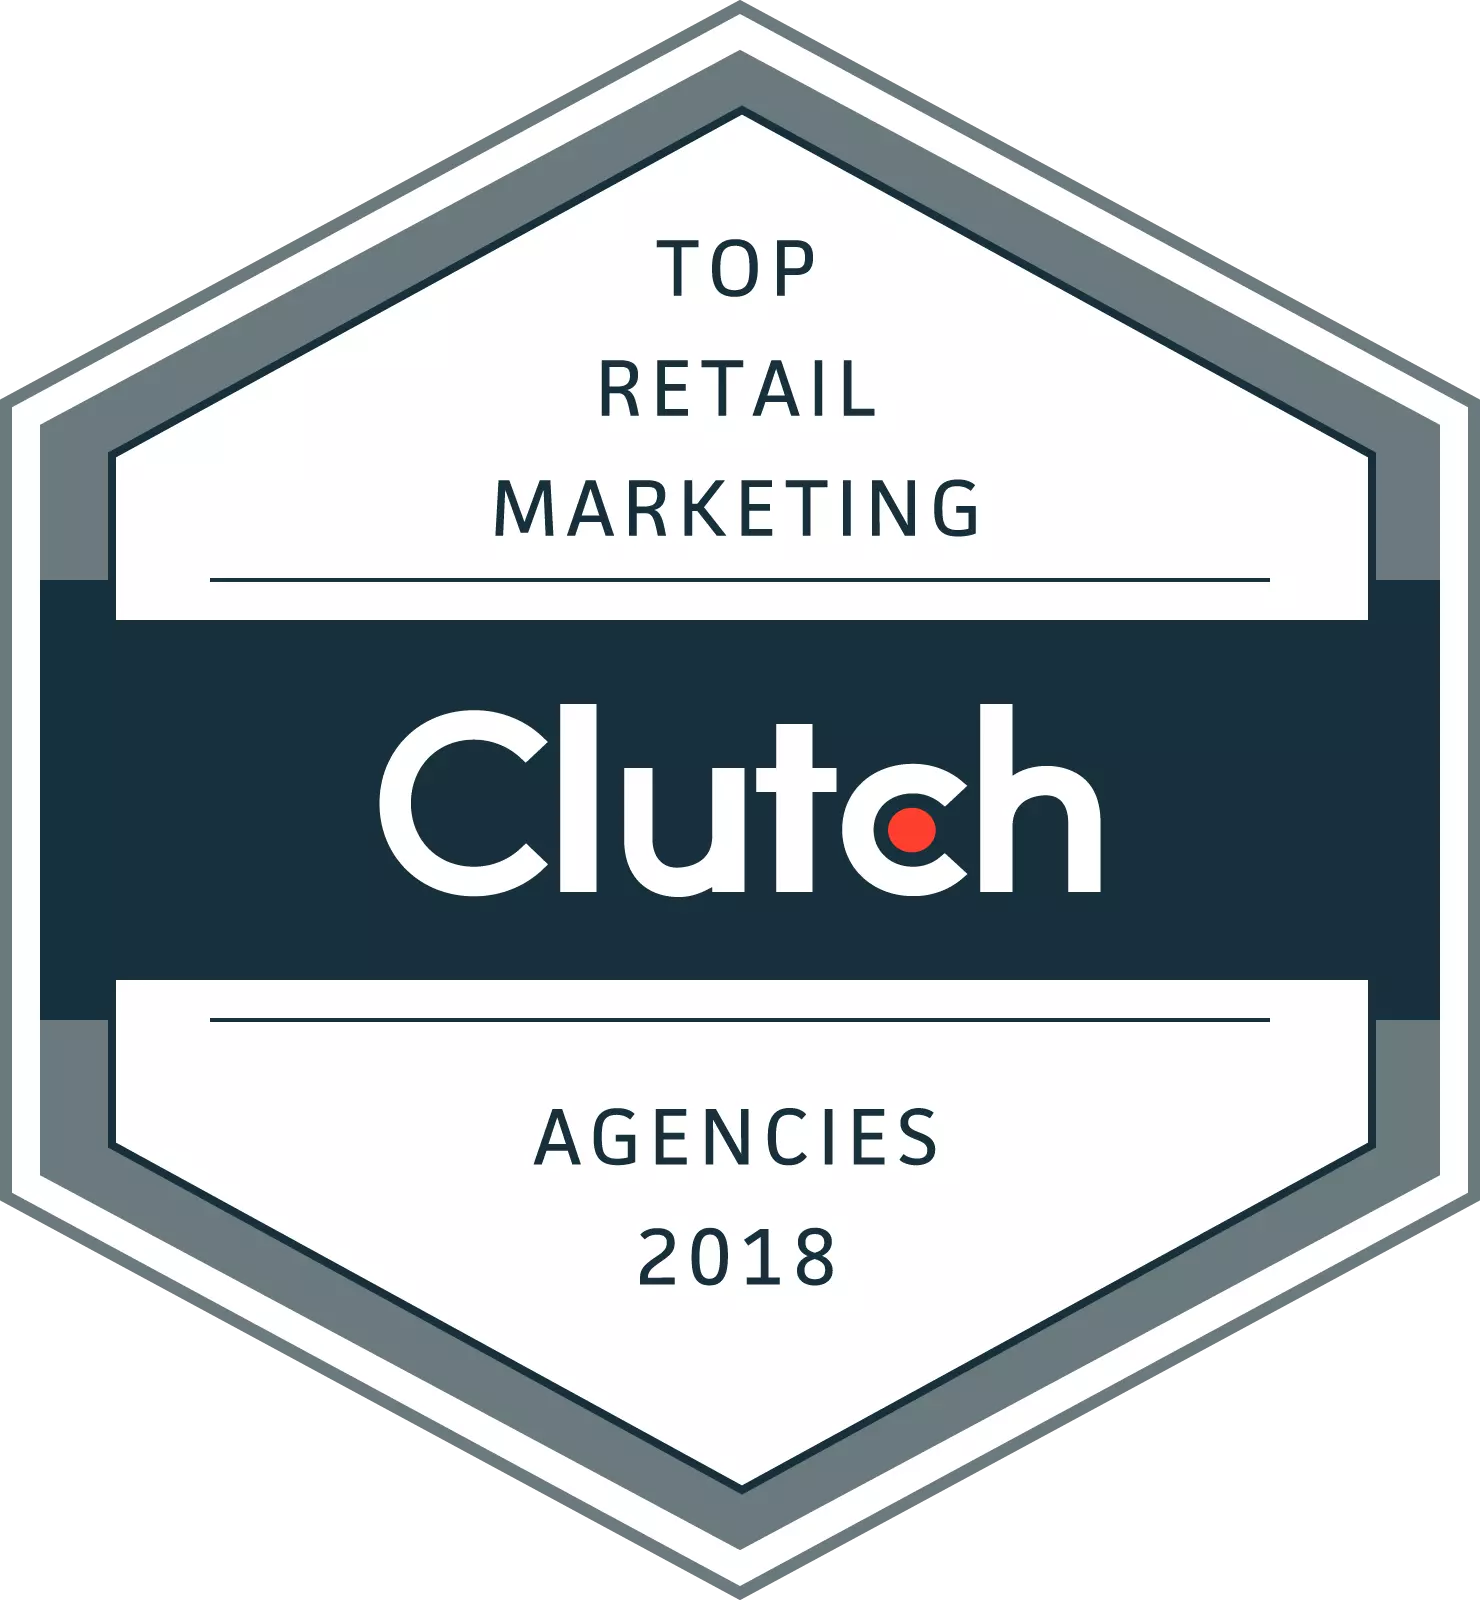 Named Top 15 Retail Marketing + Advertising Agencies in the U.S.
Agency-research firm Clutch ranked HypeLife Brands one of the top 15 retail/B2C agencies in the U.S. after analyzing 1000’s of agencies' presence and leadership in the market, and interviewing their clients to learn about work quality.
etc